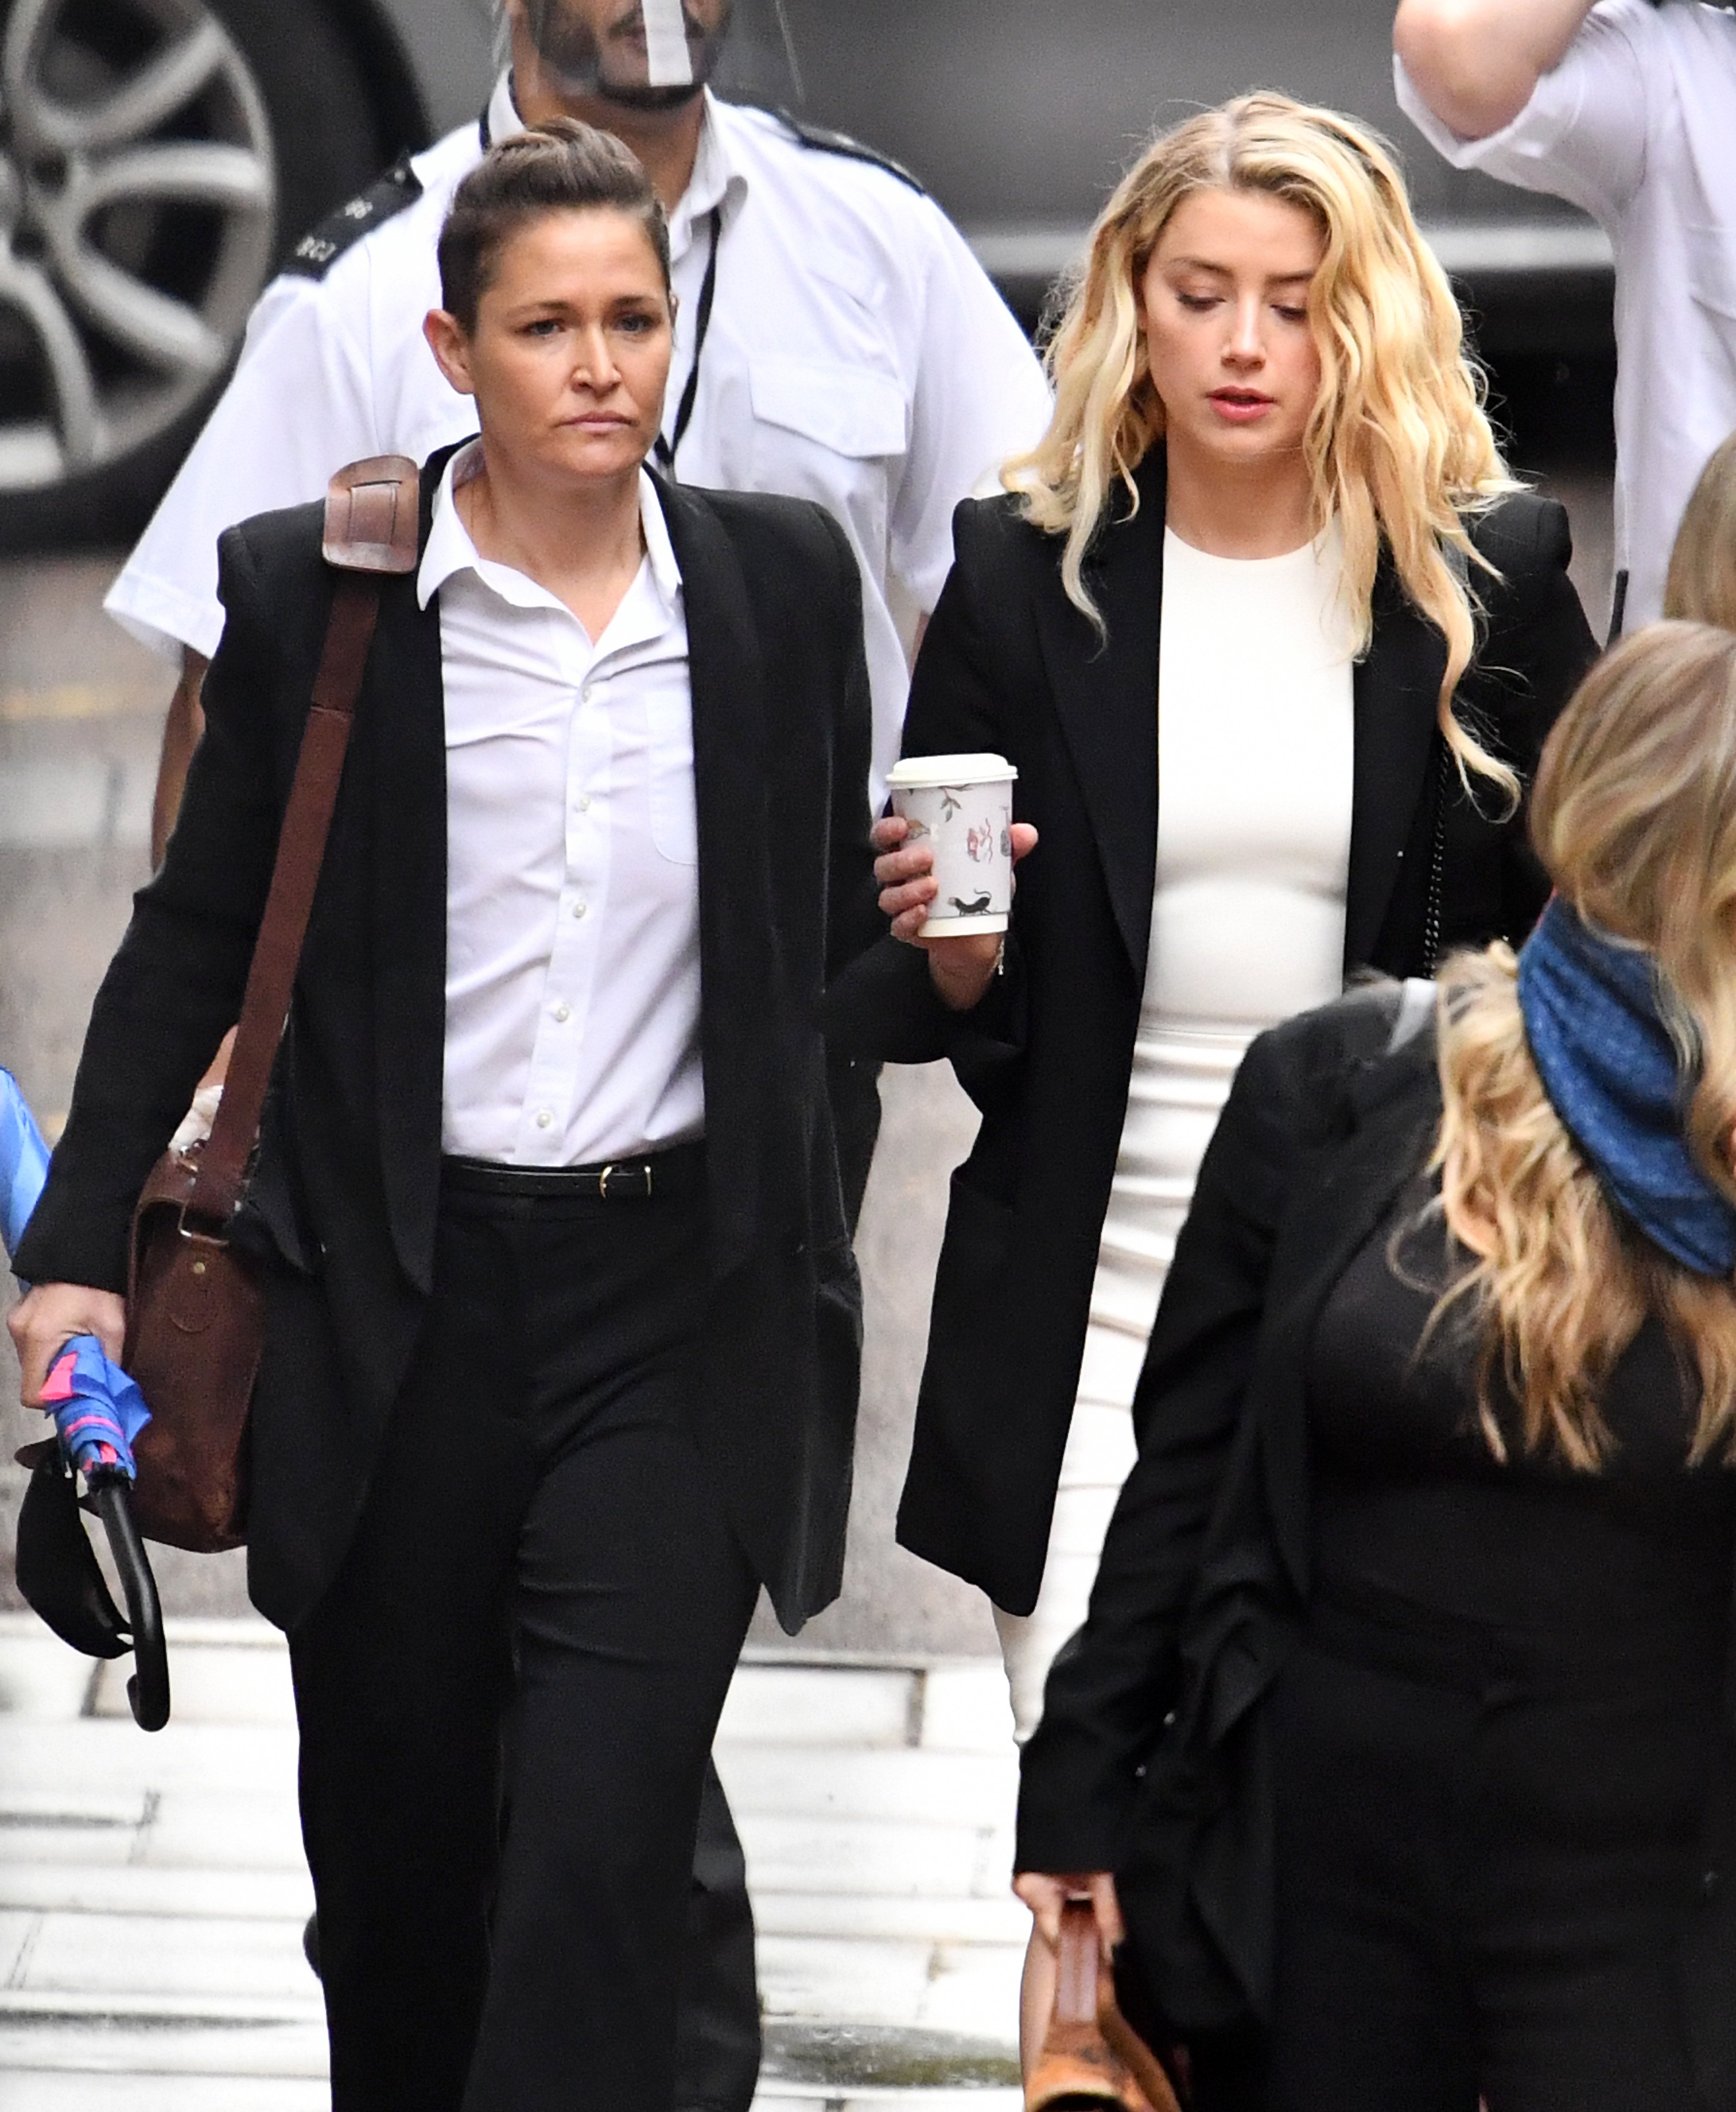 Bianca Butti with her ex-girlfriend, Amber Heard, arriving at the Royal Courts of Justice in London | Source: Getty Images